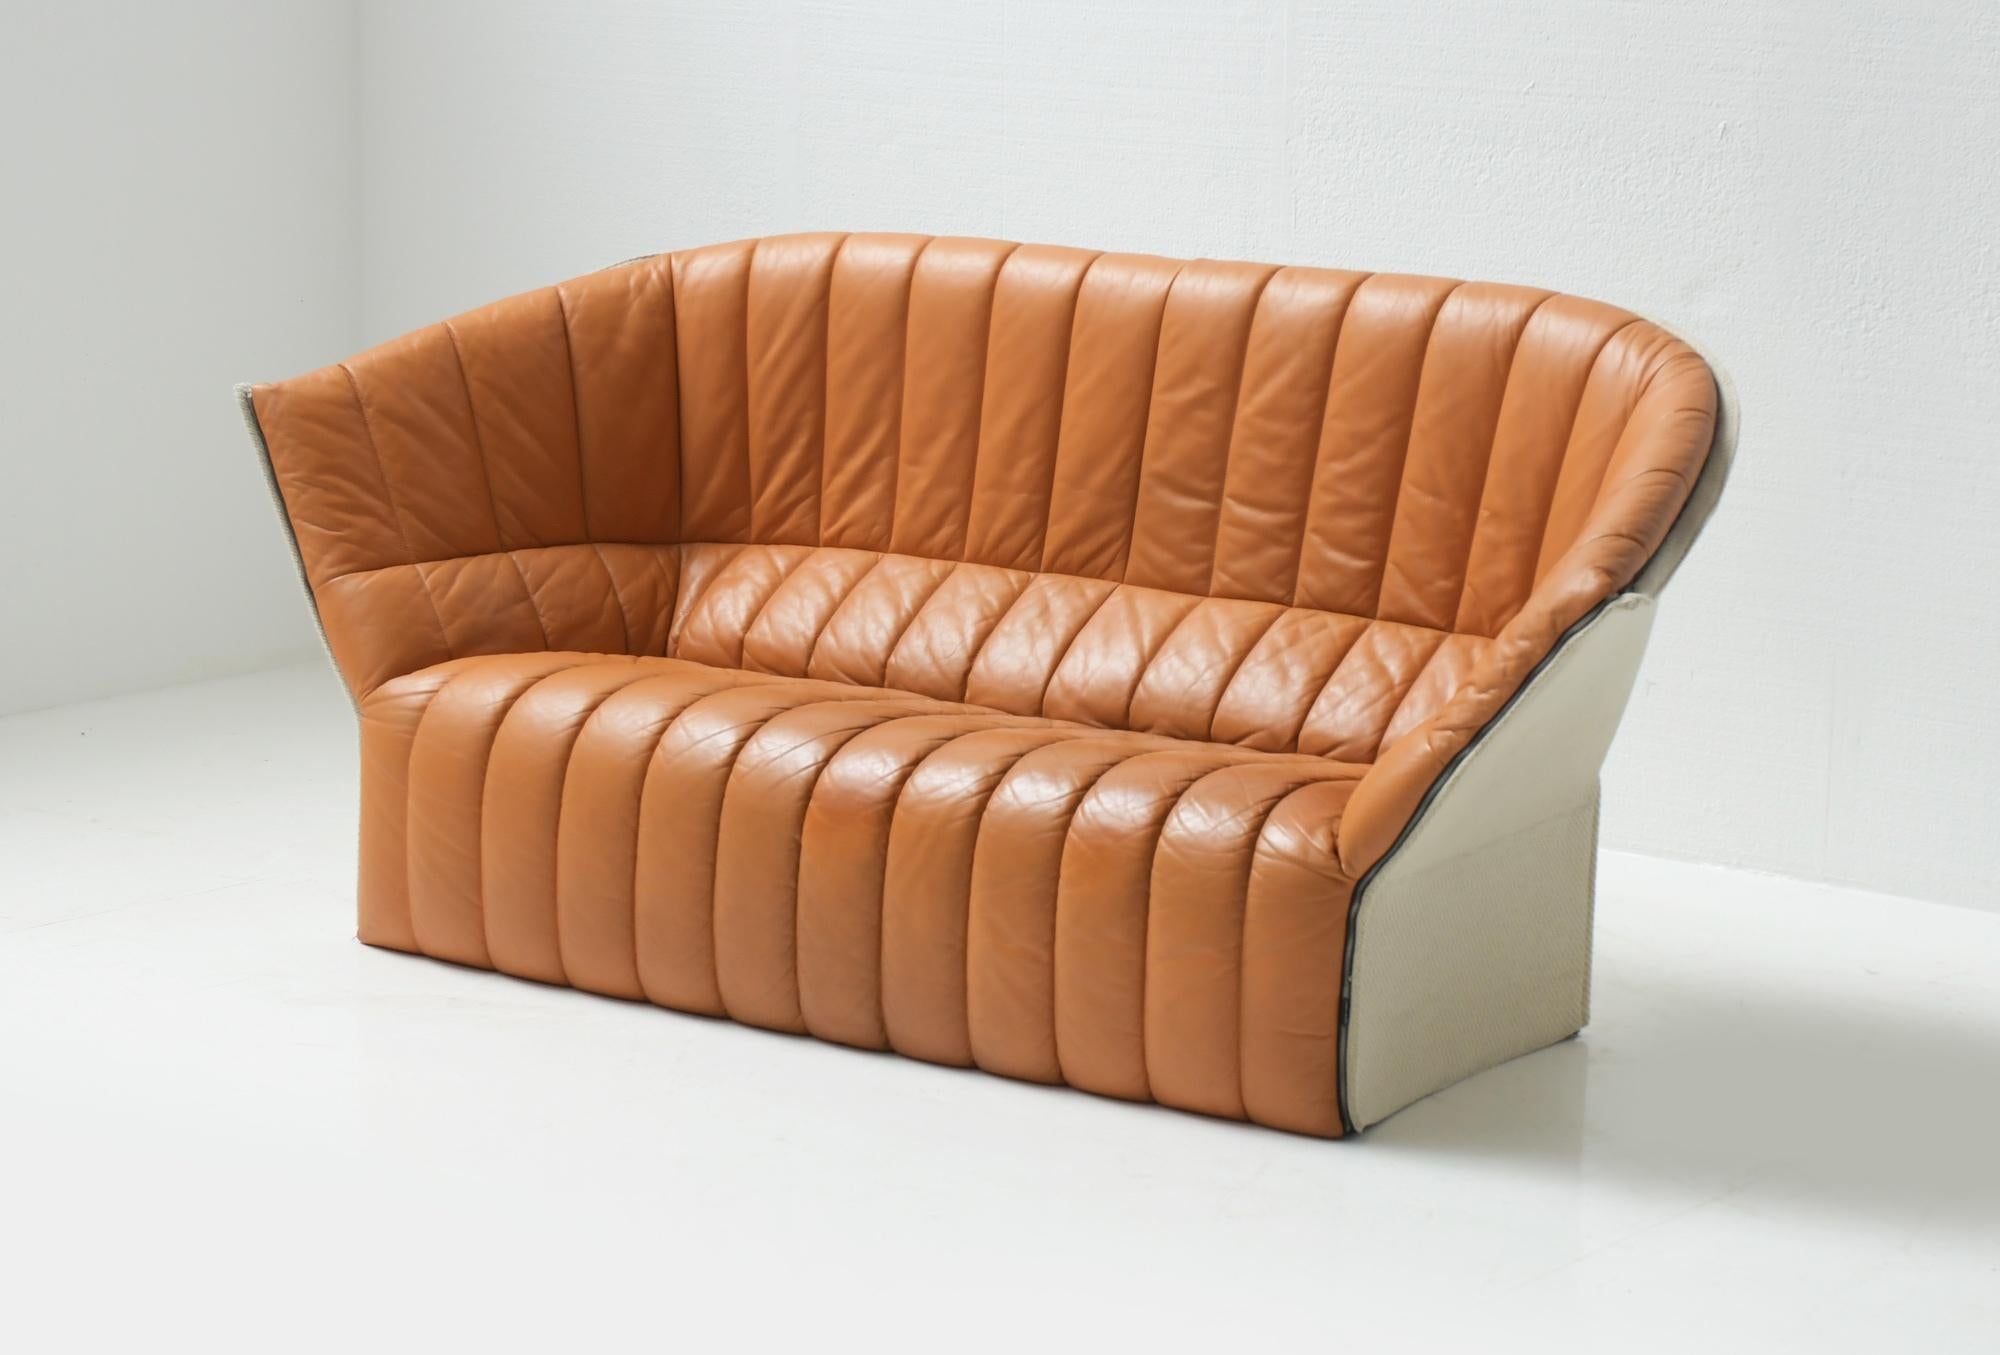 Great Moel sofa : original orange leather & off white wool.
This sofa is a striking piece of contemporary design with a shell-like silhouette,

Very good condition. No damage.